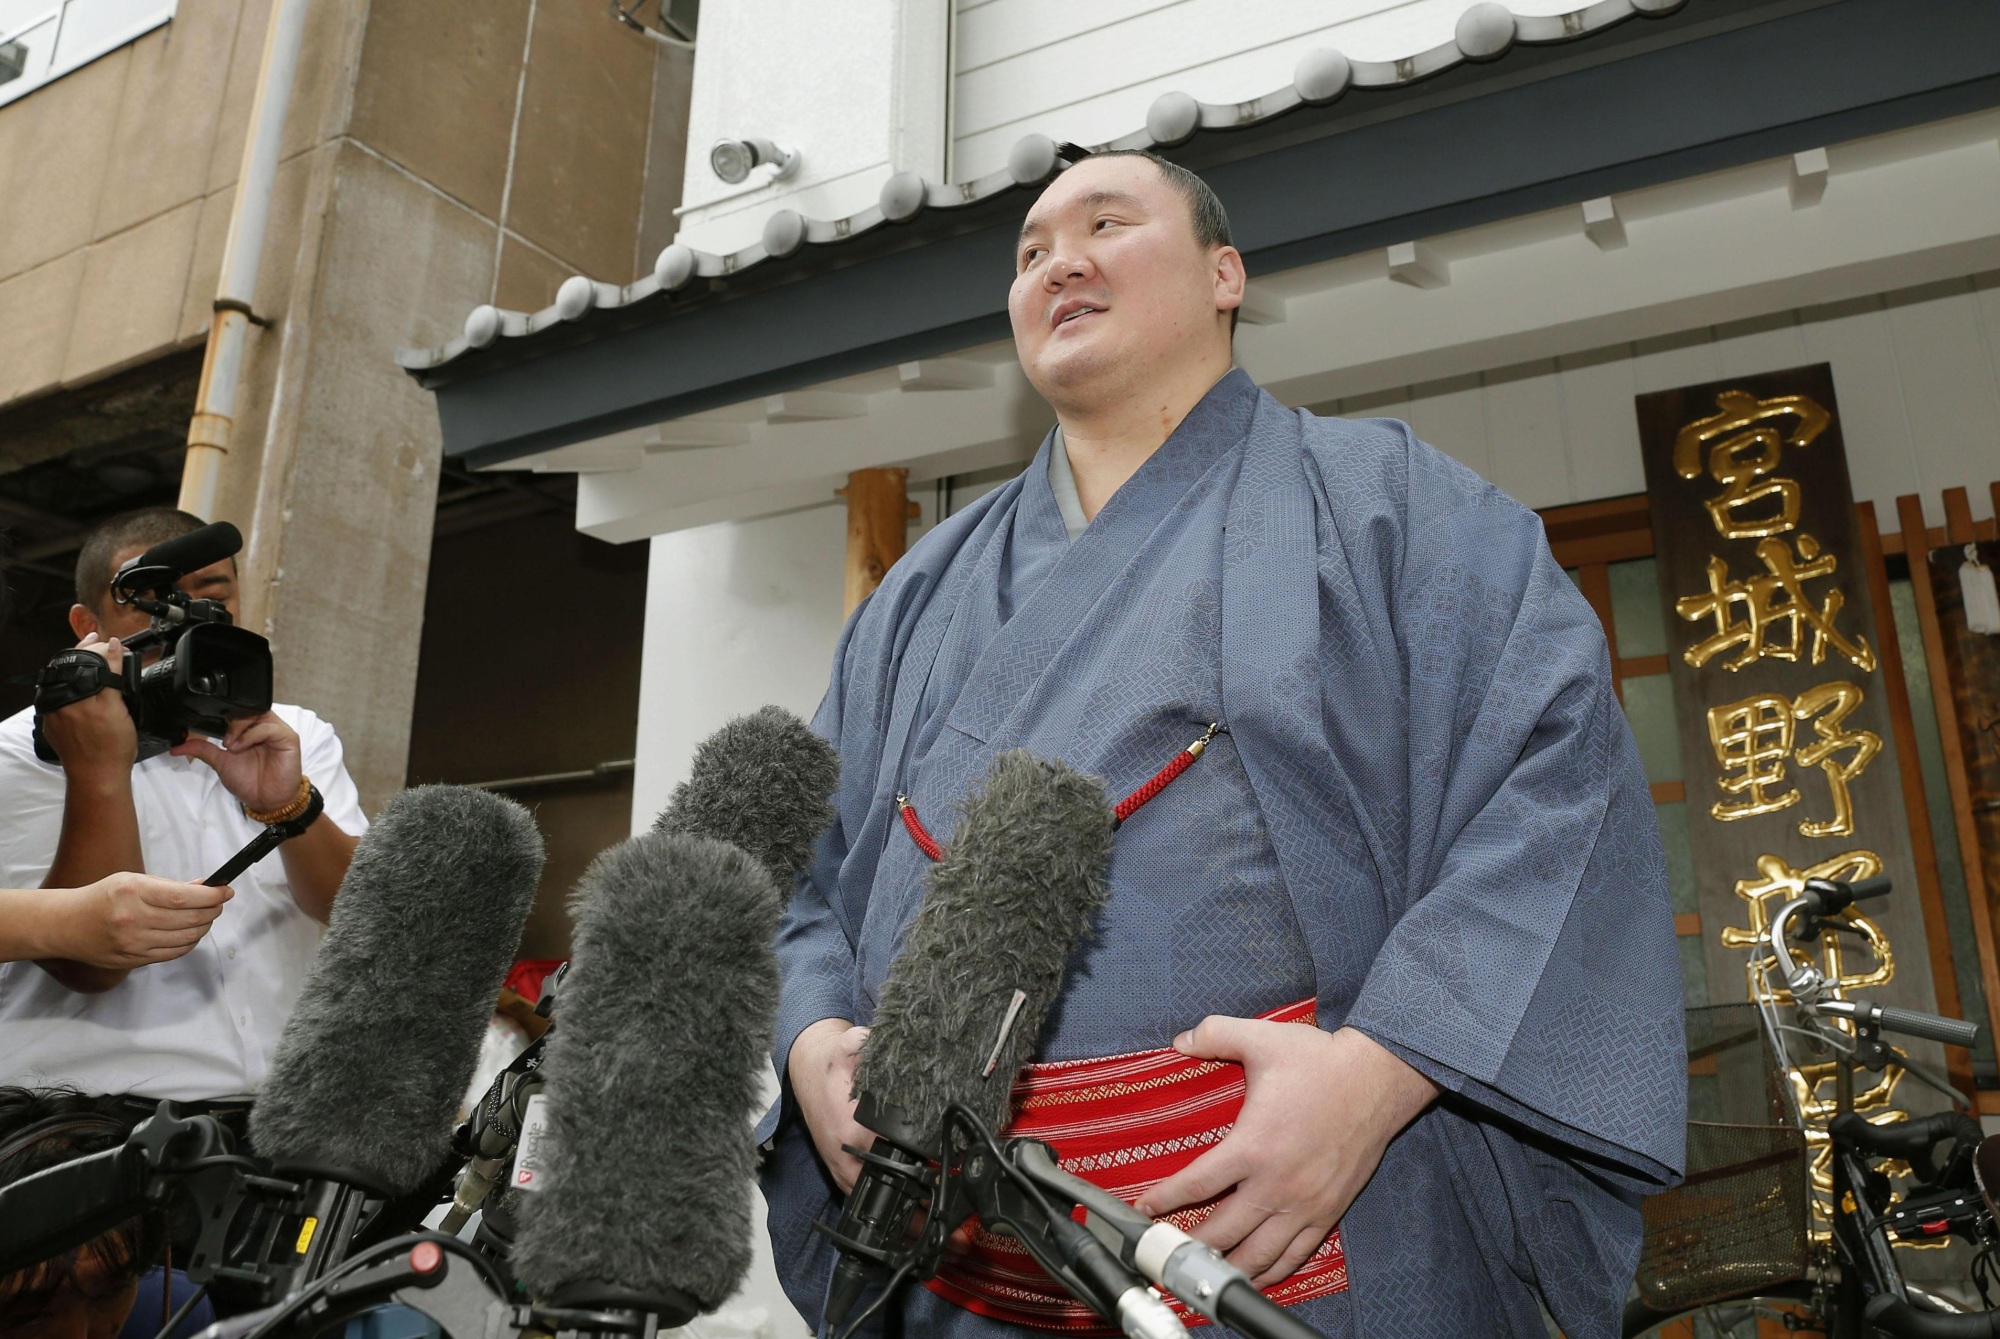 Turning Japanese: Sumo champ Hakuho gets citizenship | The Japan Times